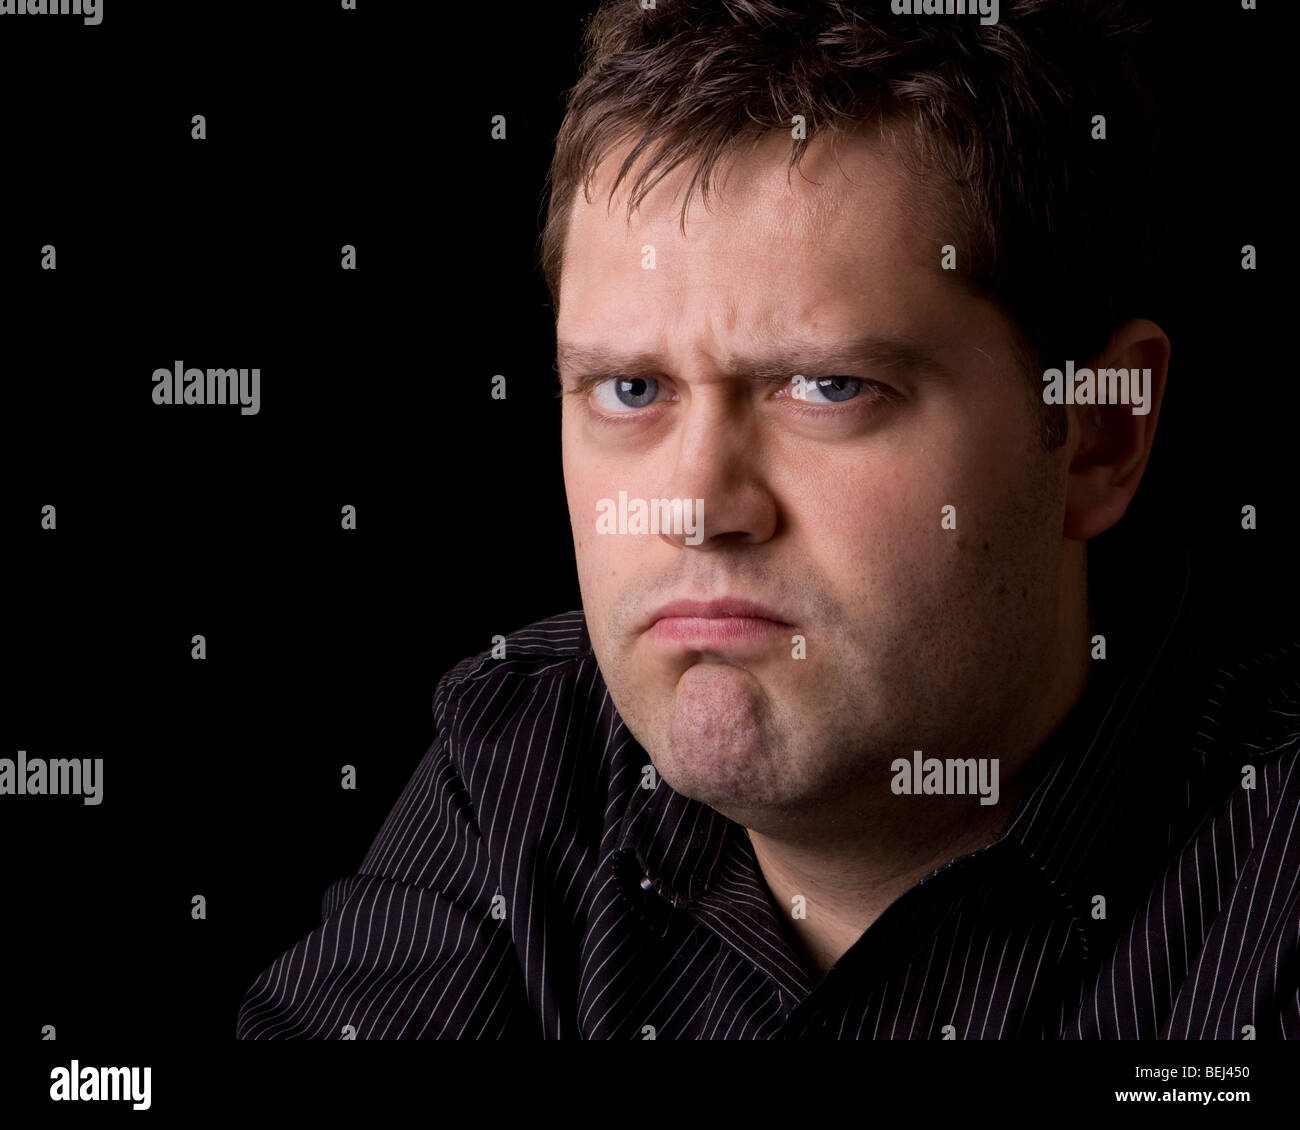 Nick Willoughby - Moods and Emotions Stock Photo - Alamy